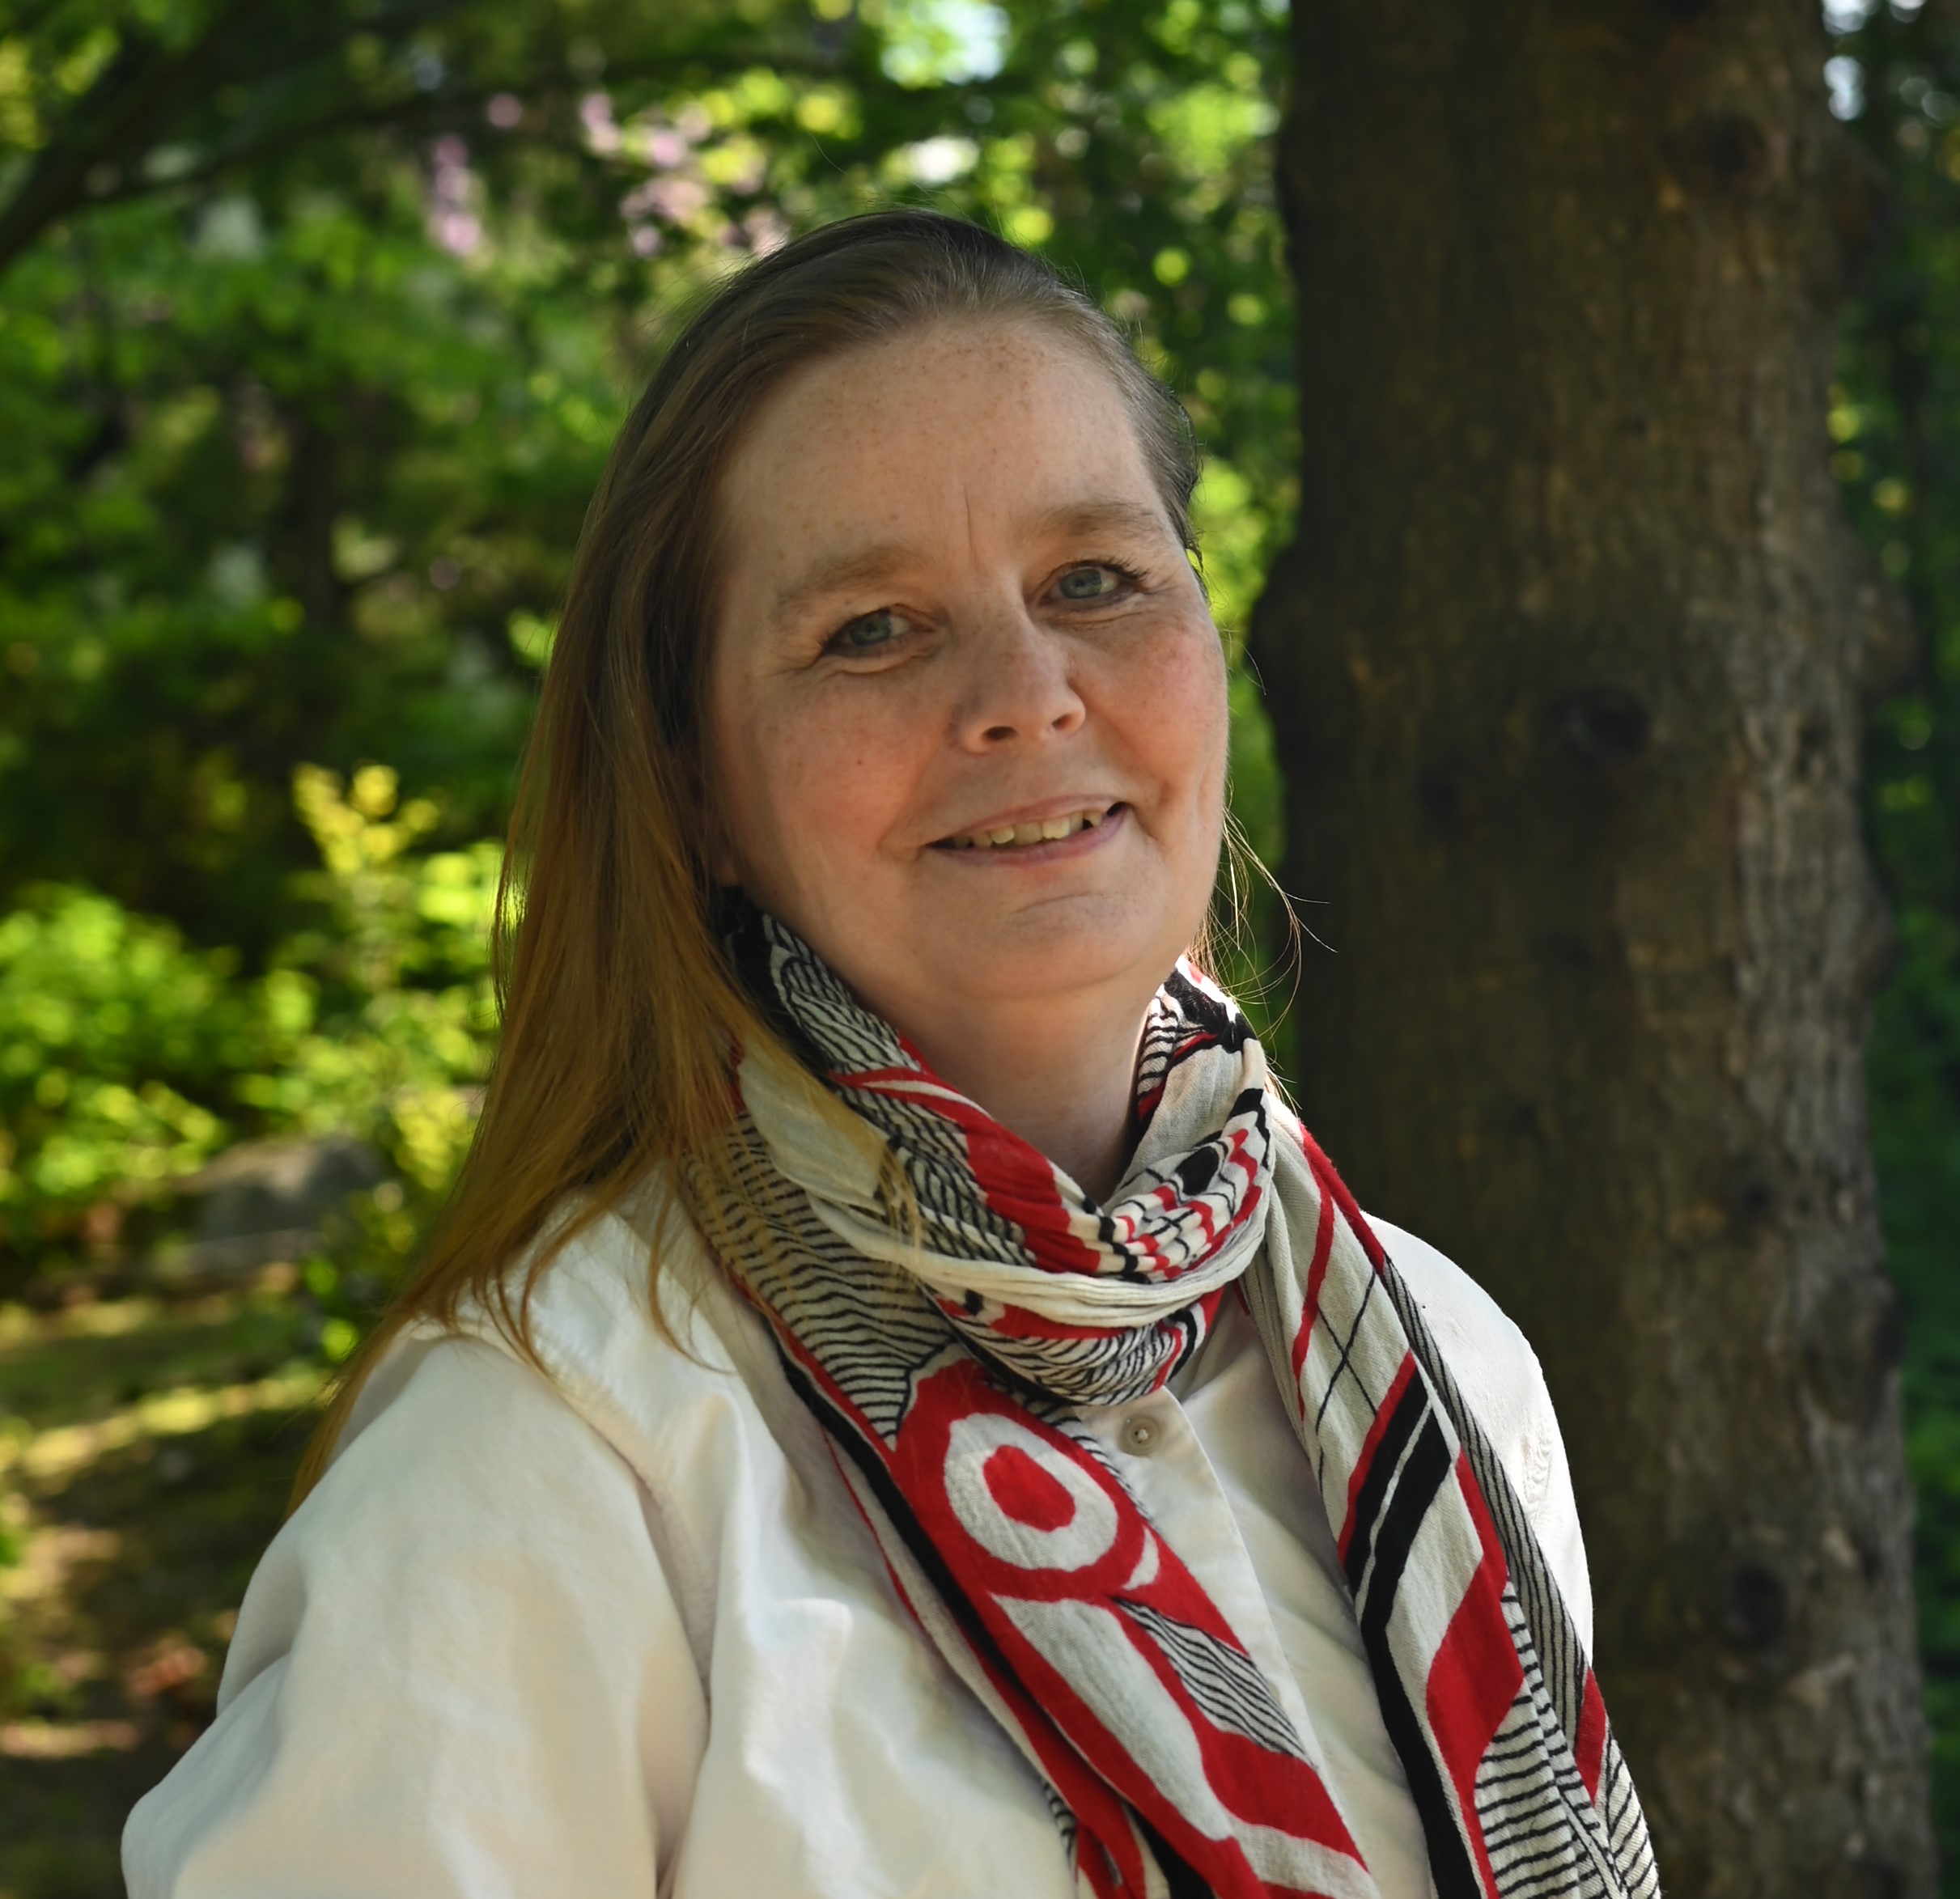 white woman with long hair wearing a white sweater and patterned scarf posing in front of a tree in a park